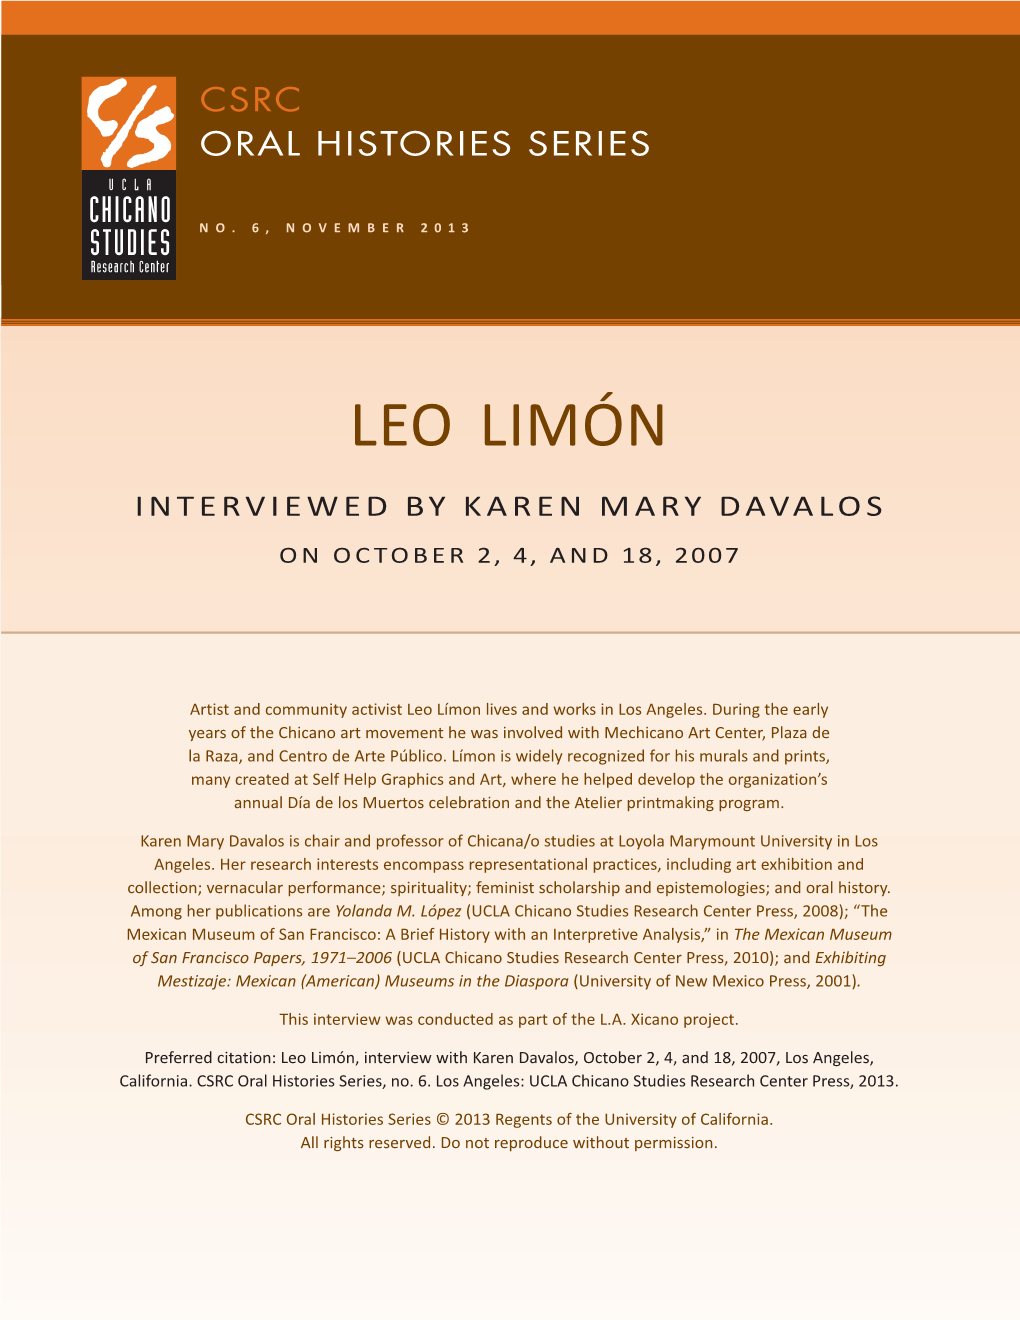 Leo Limón Interviewed by Karen Mary Davalos on October 2, 4, and 18, 2007